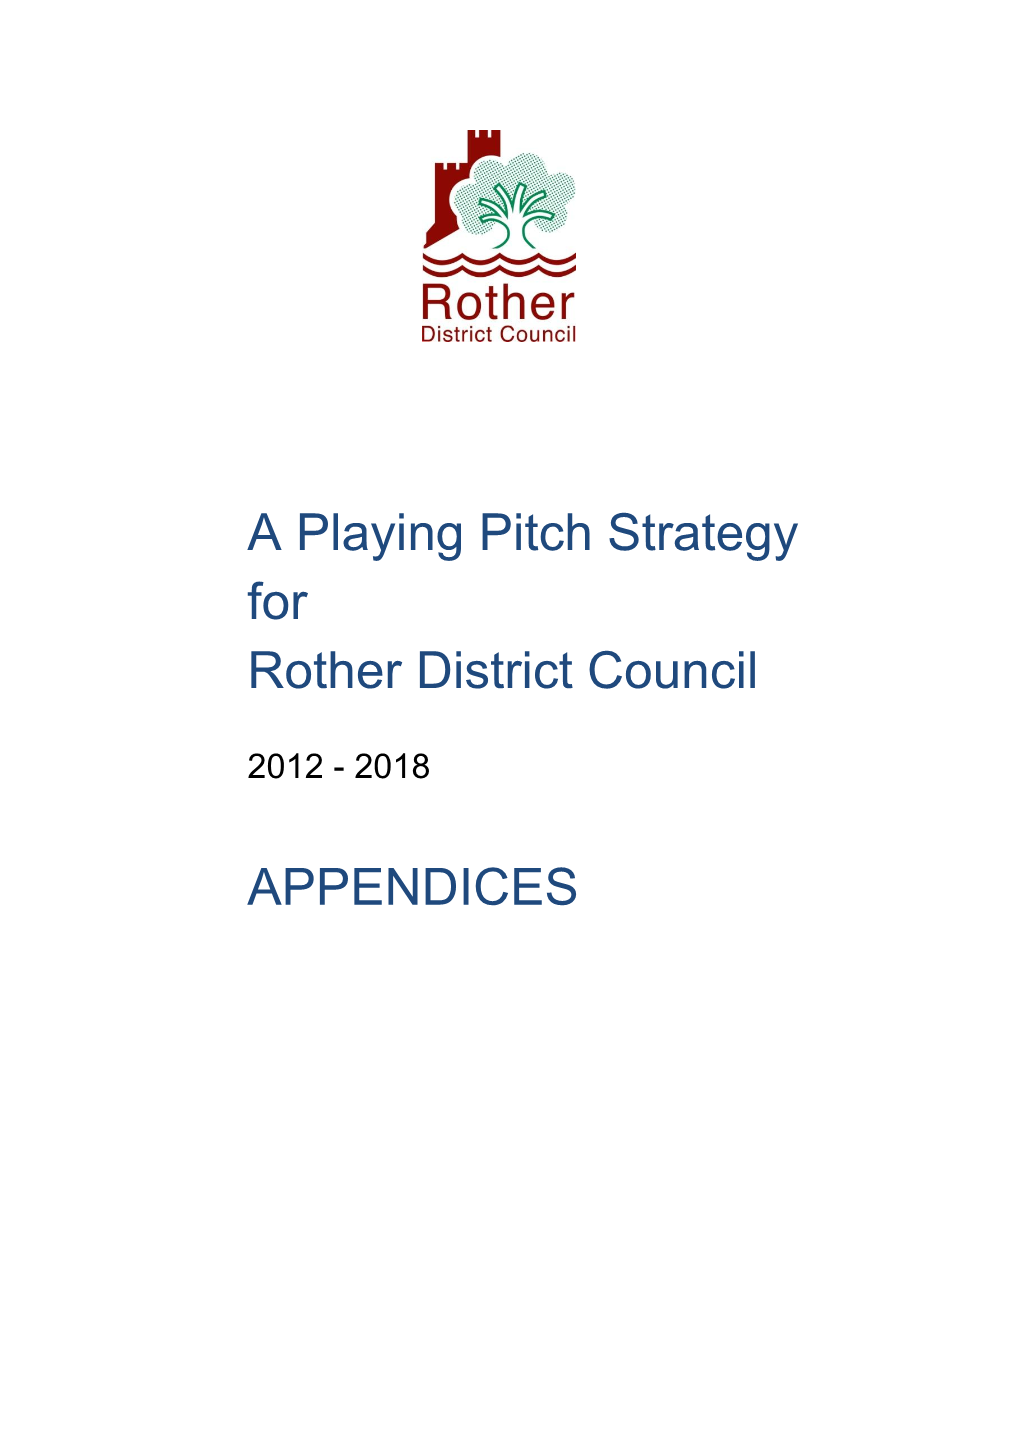 A Playing Pitch Strategy for Rother District Council APPENDICES